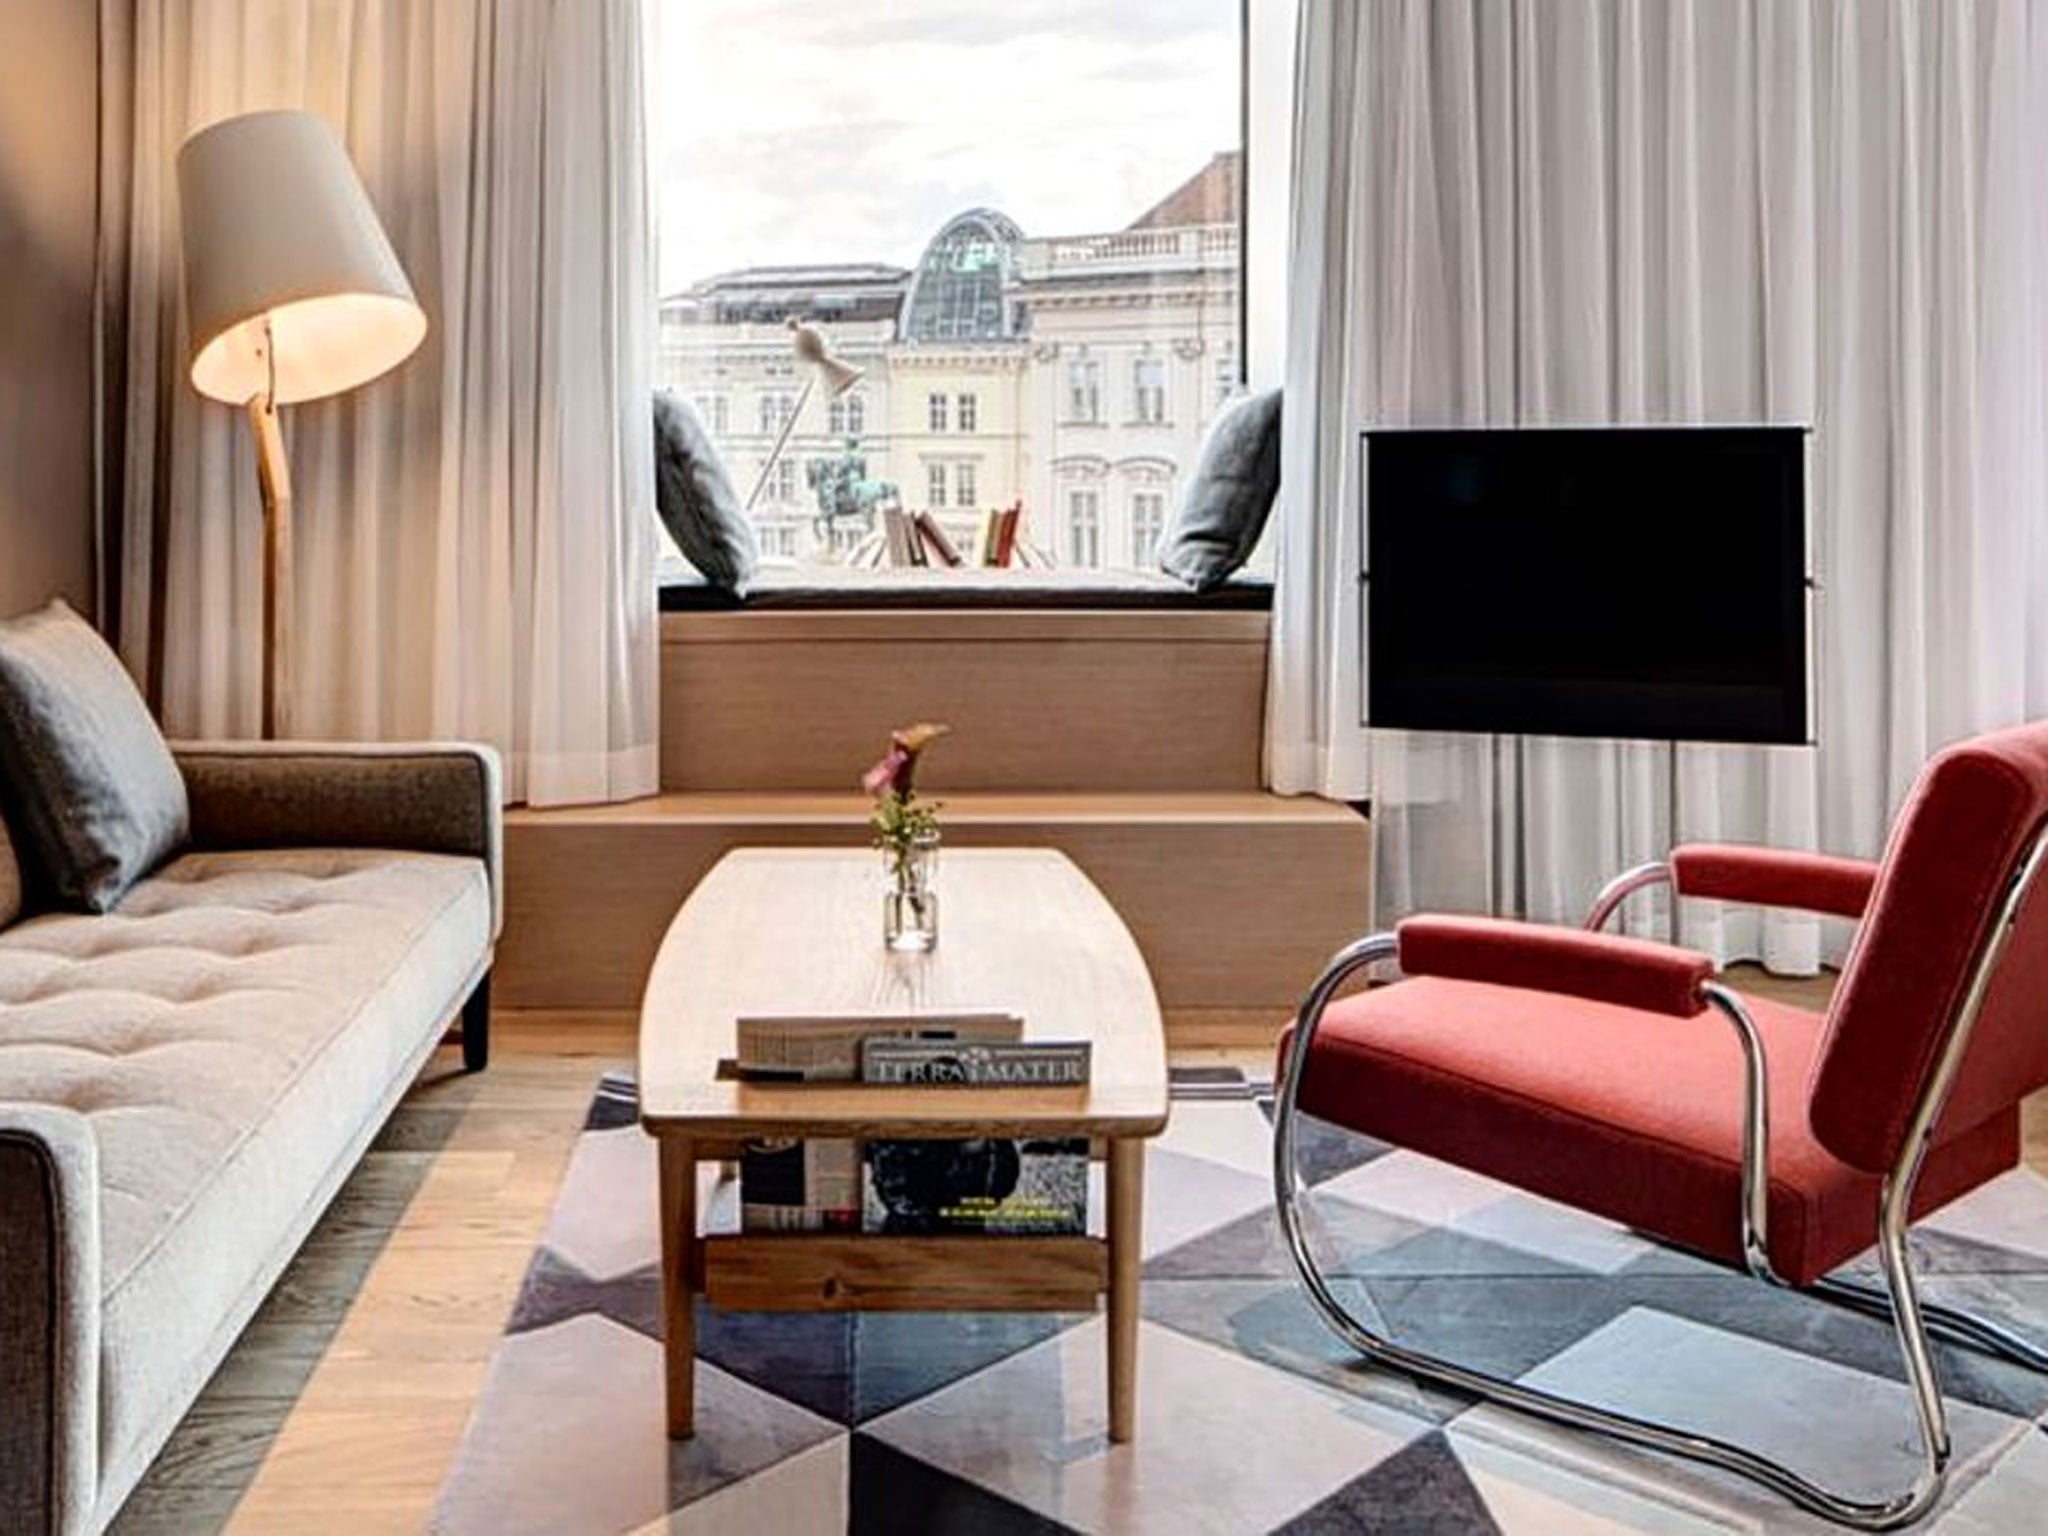 The Guesthouse is a new boutique hotel in Vienna with sleek, modern rooms, mid-century furniture and window seats that gaze across the city's rooftops.